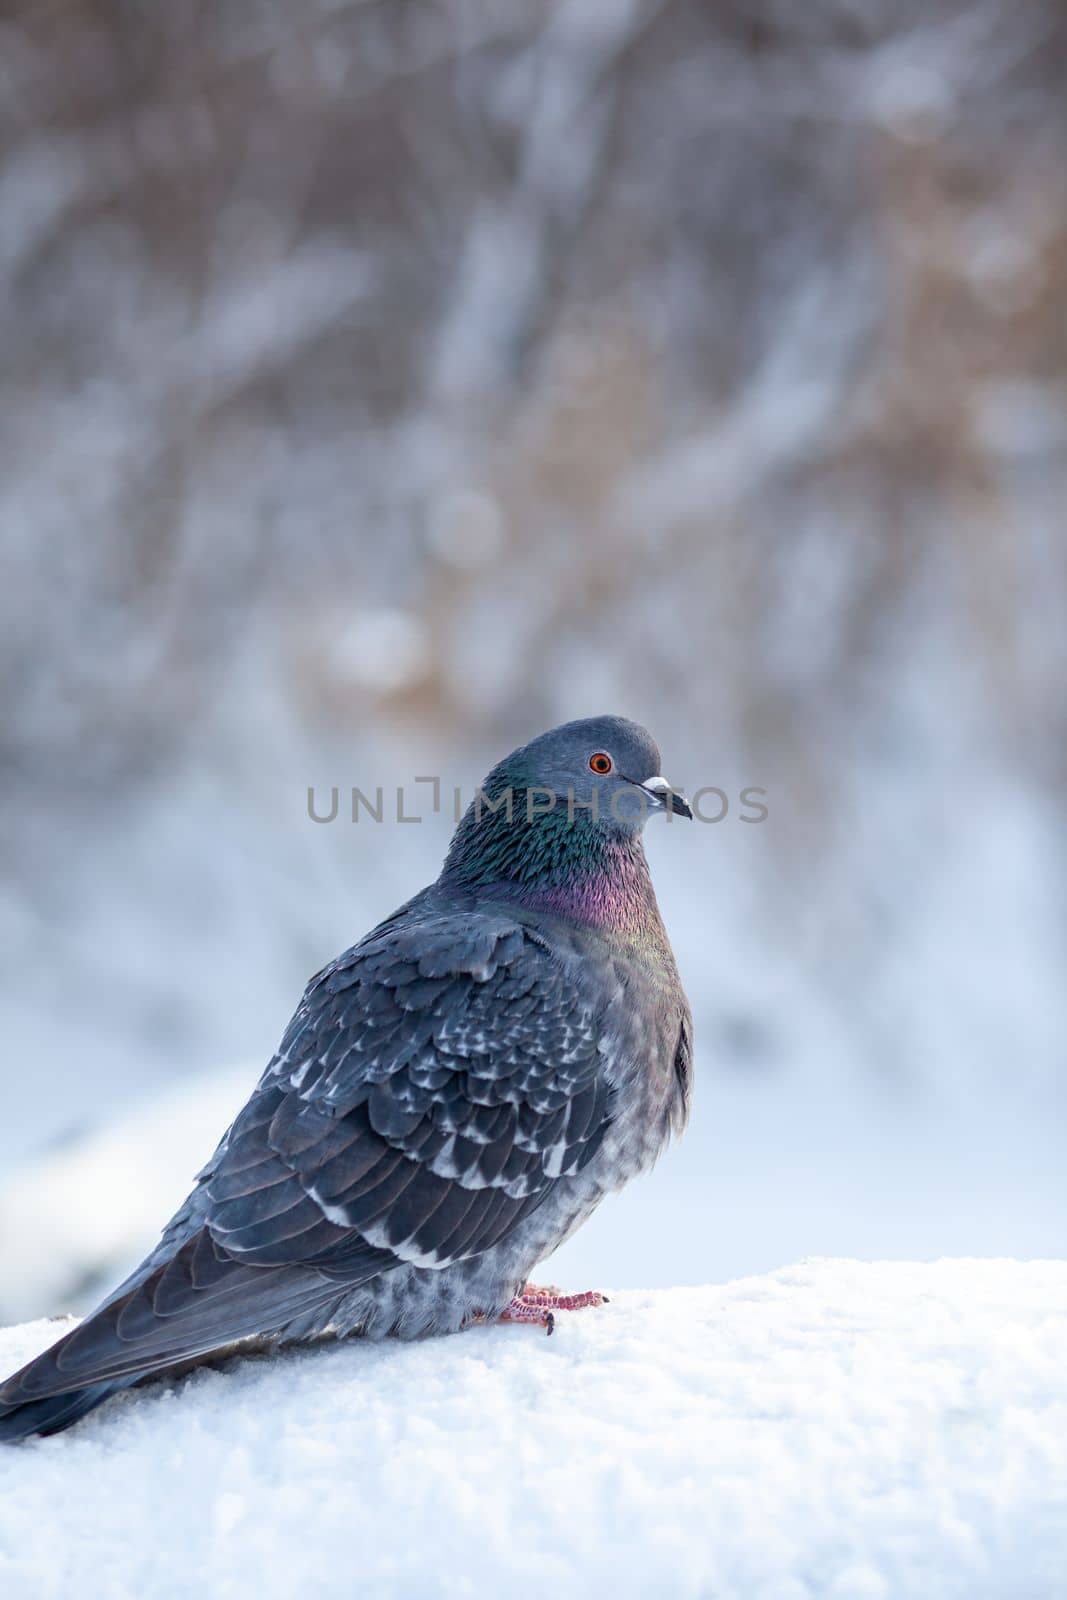 A beautiful pigeon sits on the snow in a city park in winter. Close-up of pigeons in winter on the square in the park. Birds in the cold are waiting for food from people.